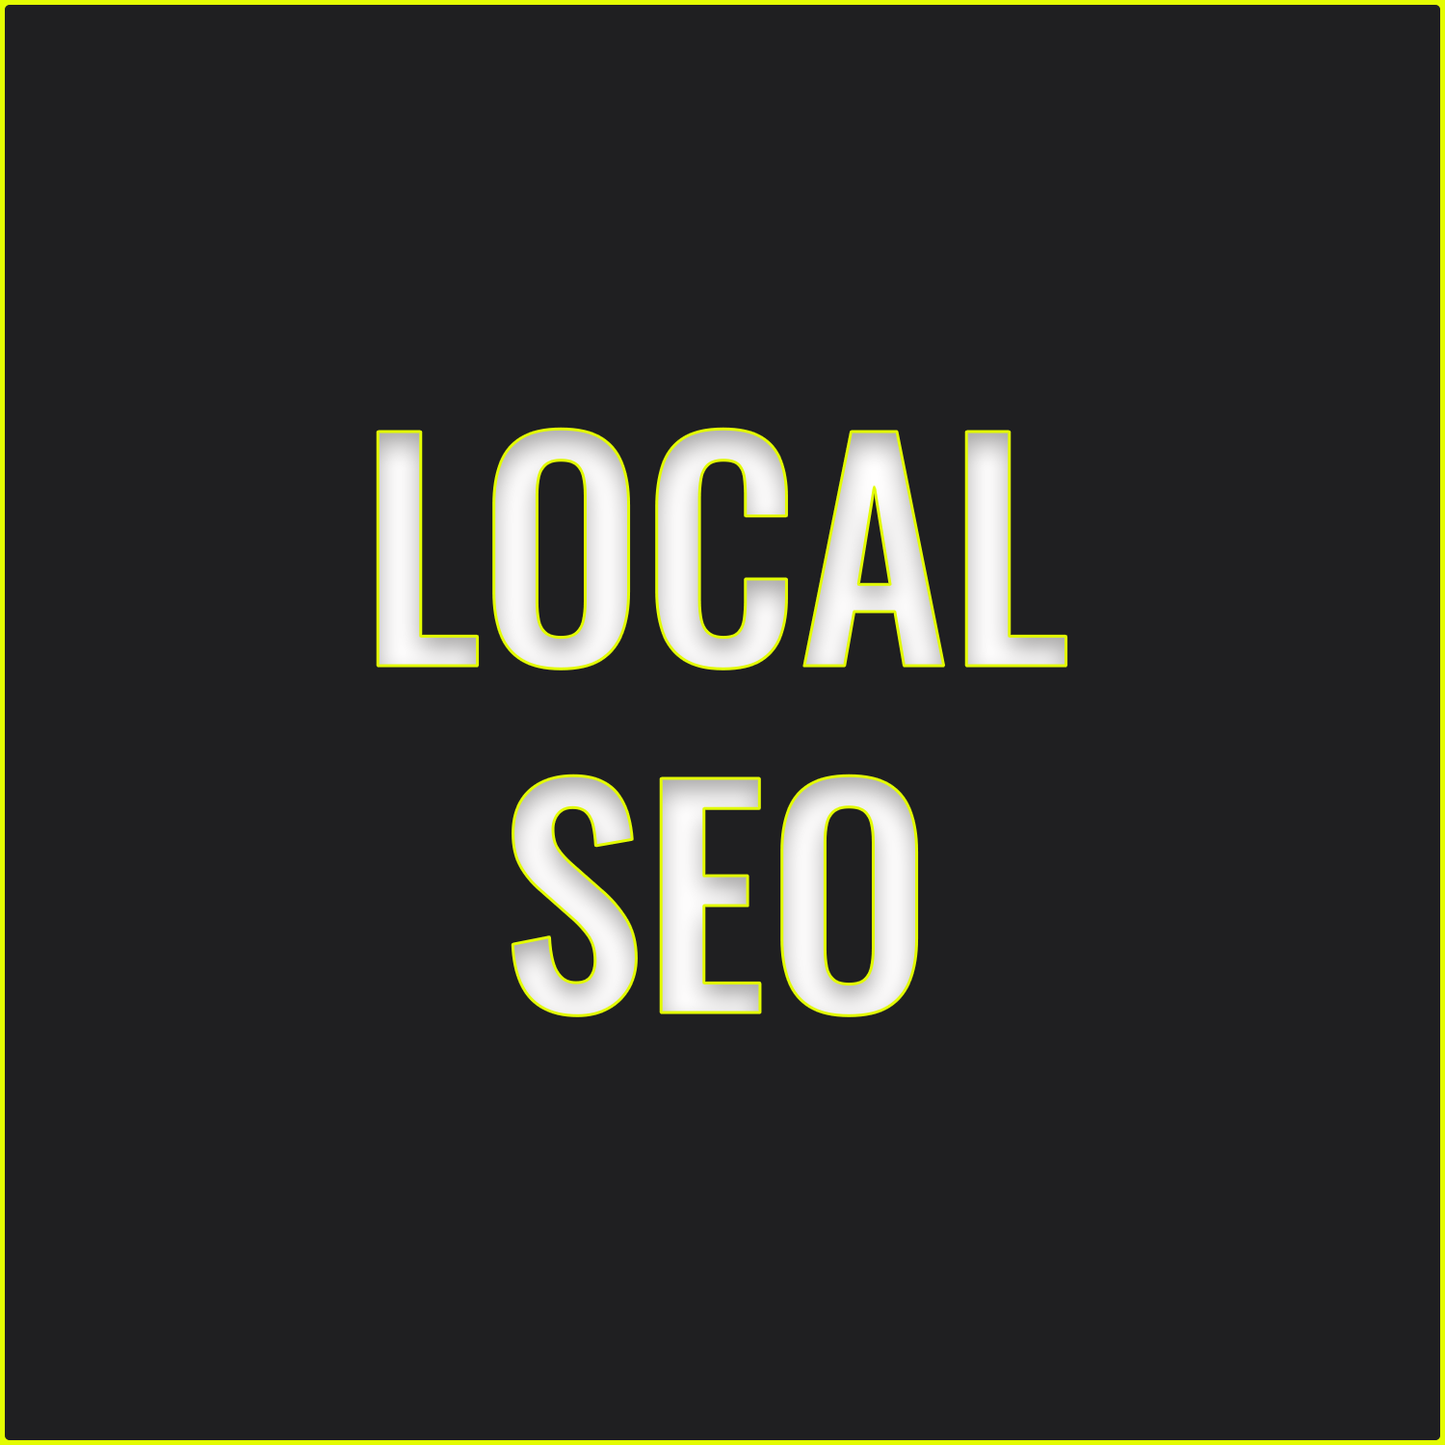 Local SEO - Increase Online Visibility And Attract More Local Customers